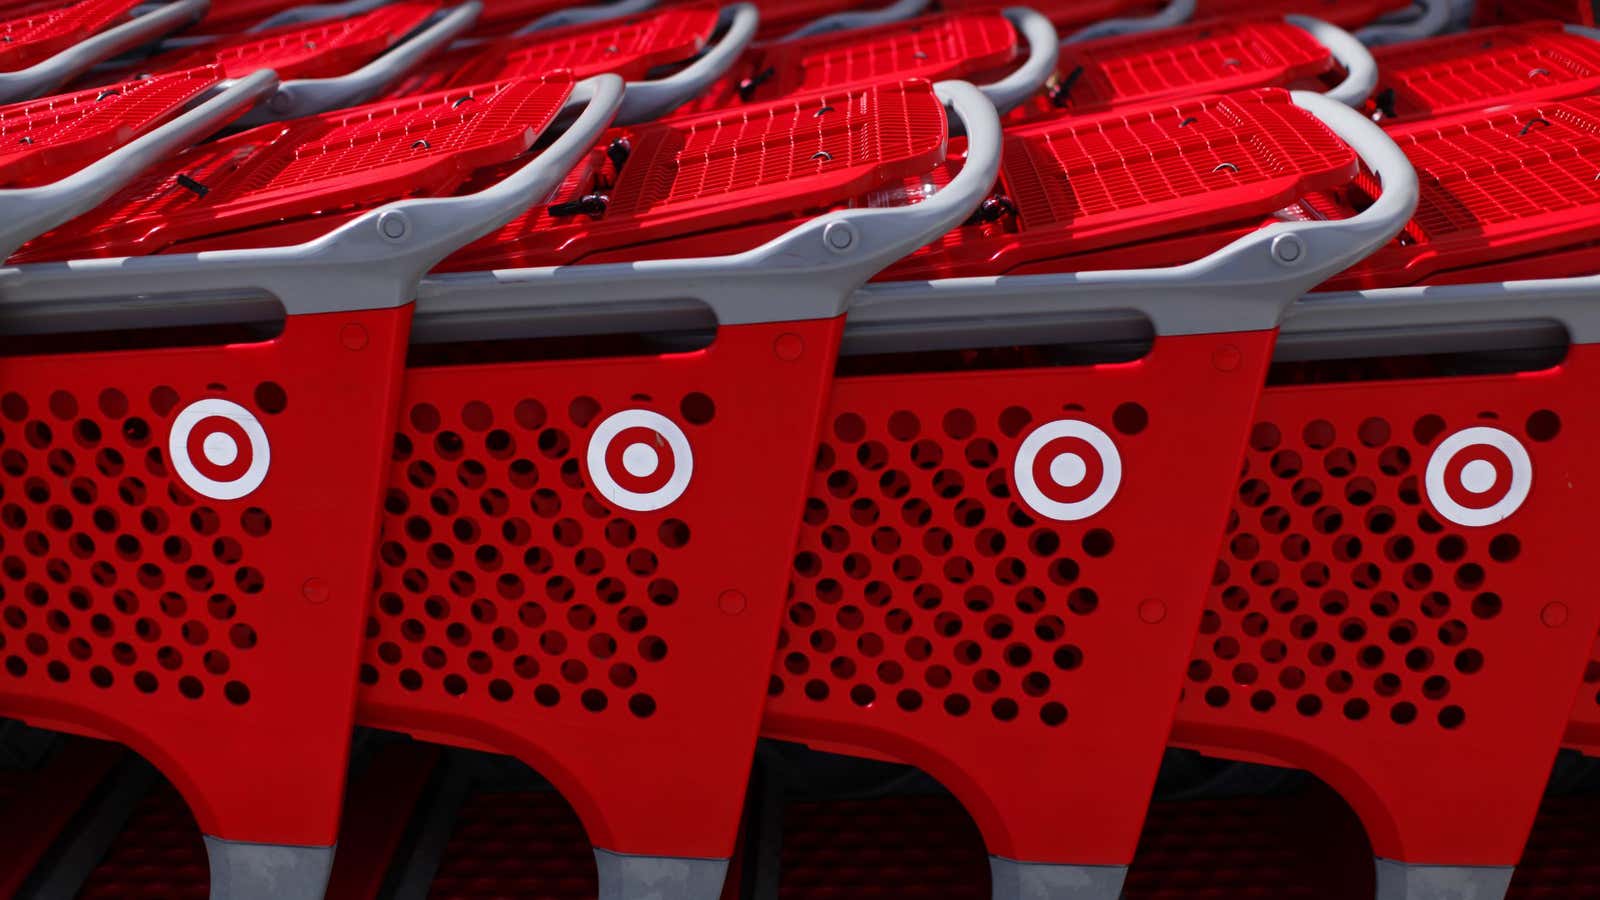 Plenty of carts are available.